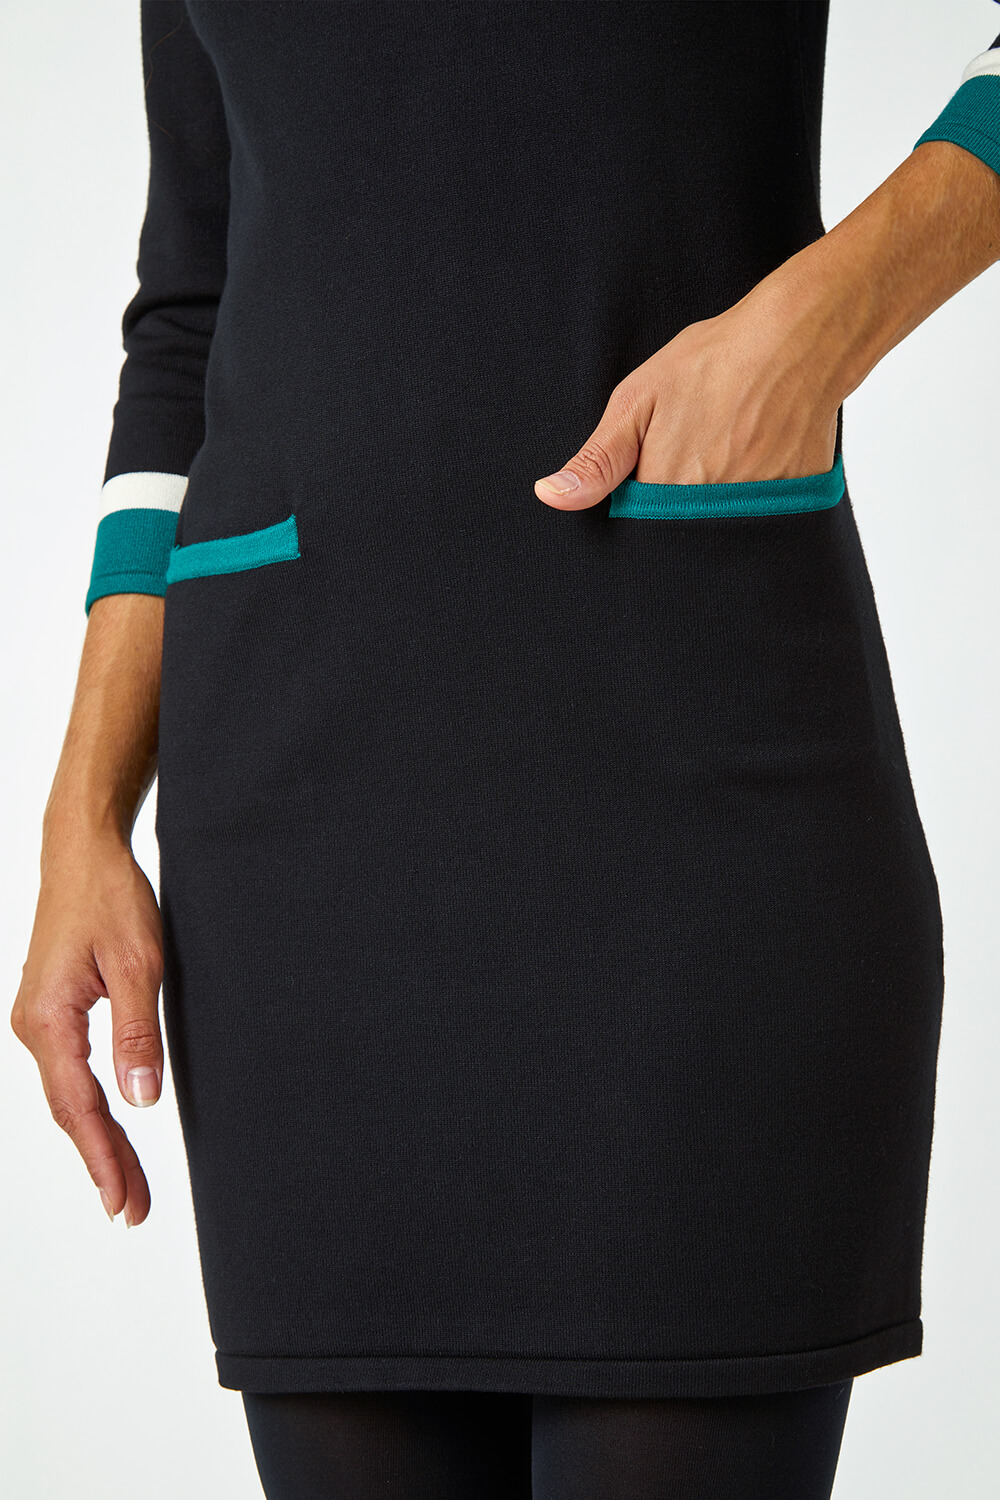 Green Knitted Colour Block Dress, Image 5 of 5